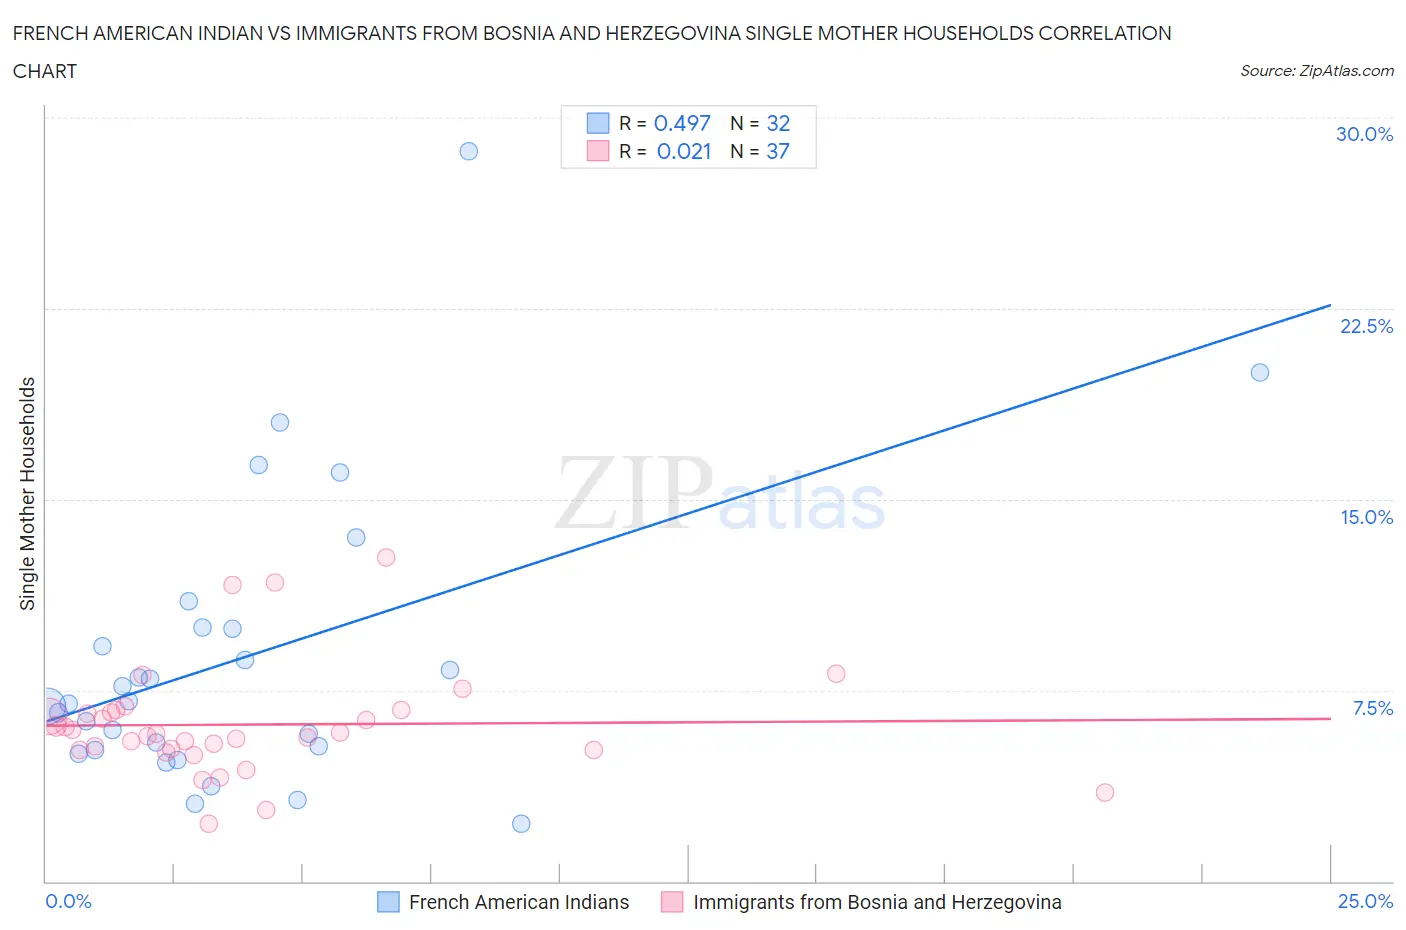 French American Indian vs Immigrants from Bosnia and Herzegovina Single Mother Households